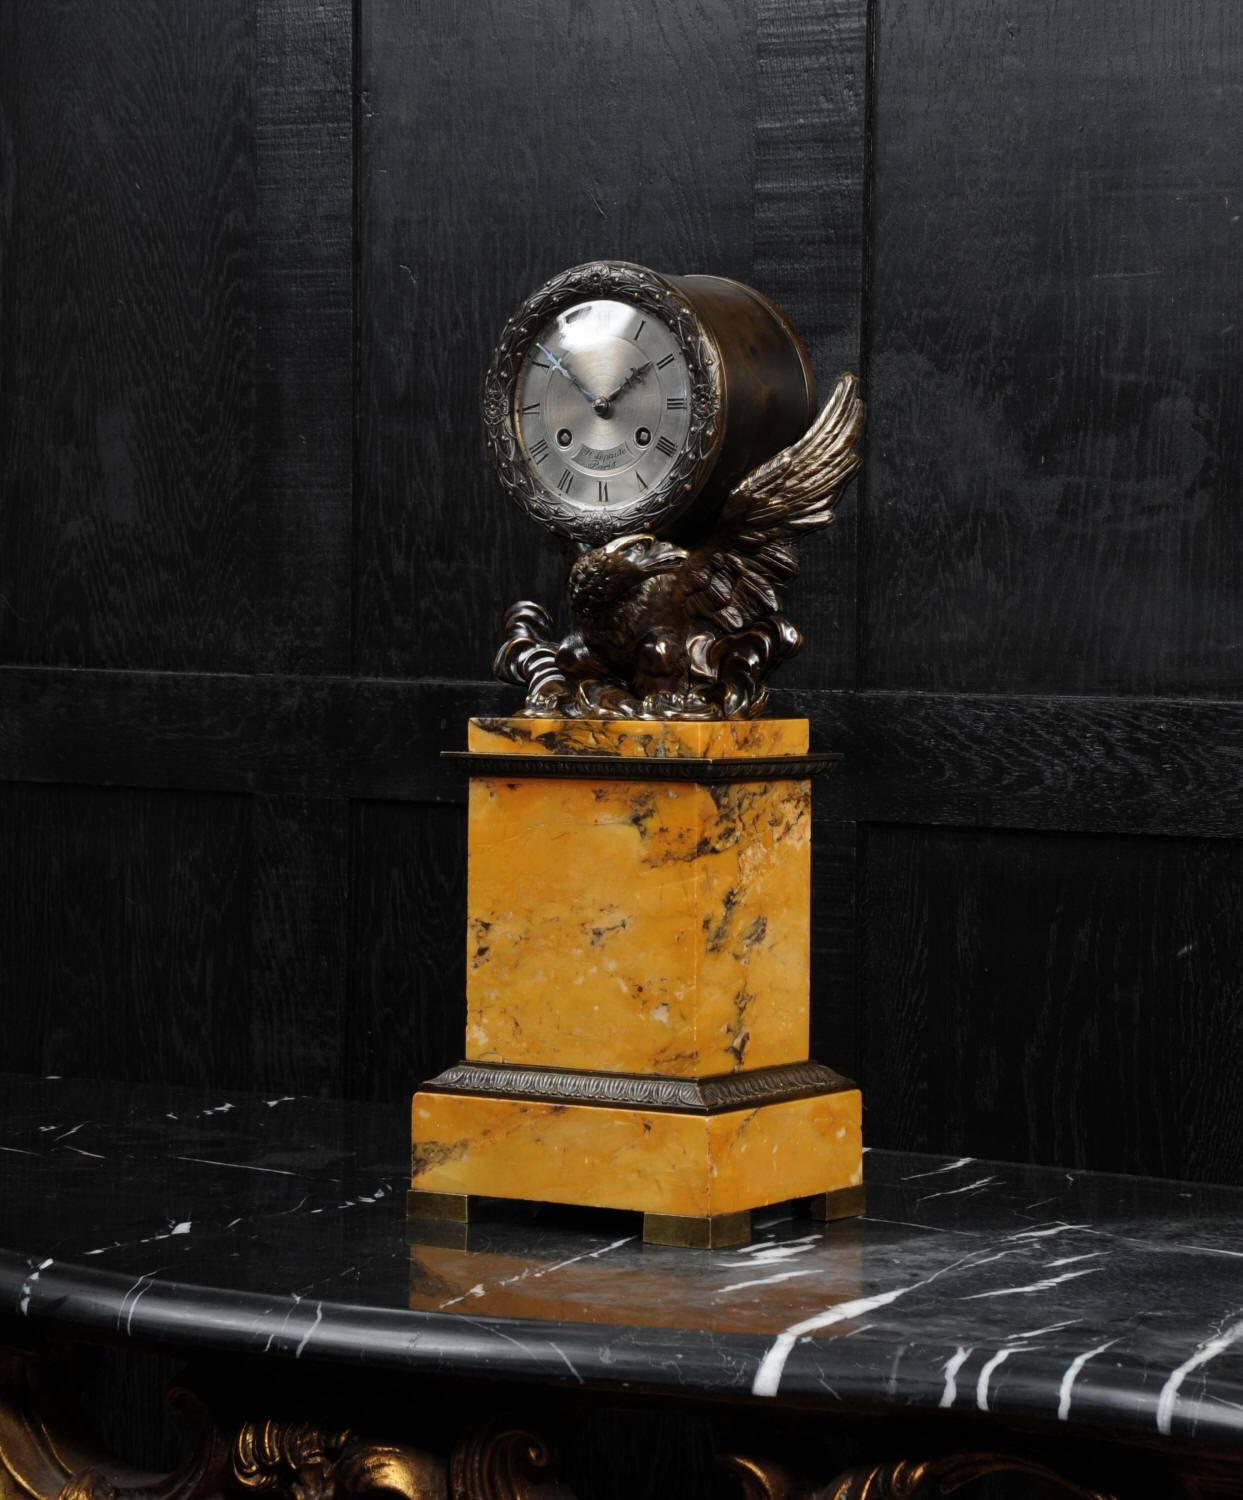 A stunning early clock from the famous Lepaute dynasty of clockmakers, fully overhauled and working. A superbly modelled bronze eagle carries the clock upon its back, perched upon a rock. The plinth is of beautifully figured Sienna marble mounted